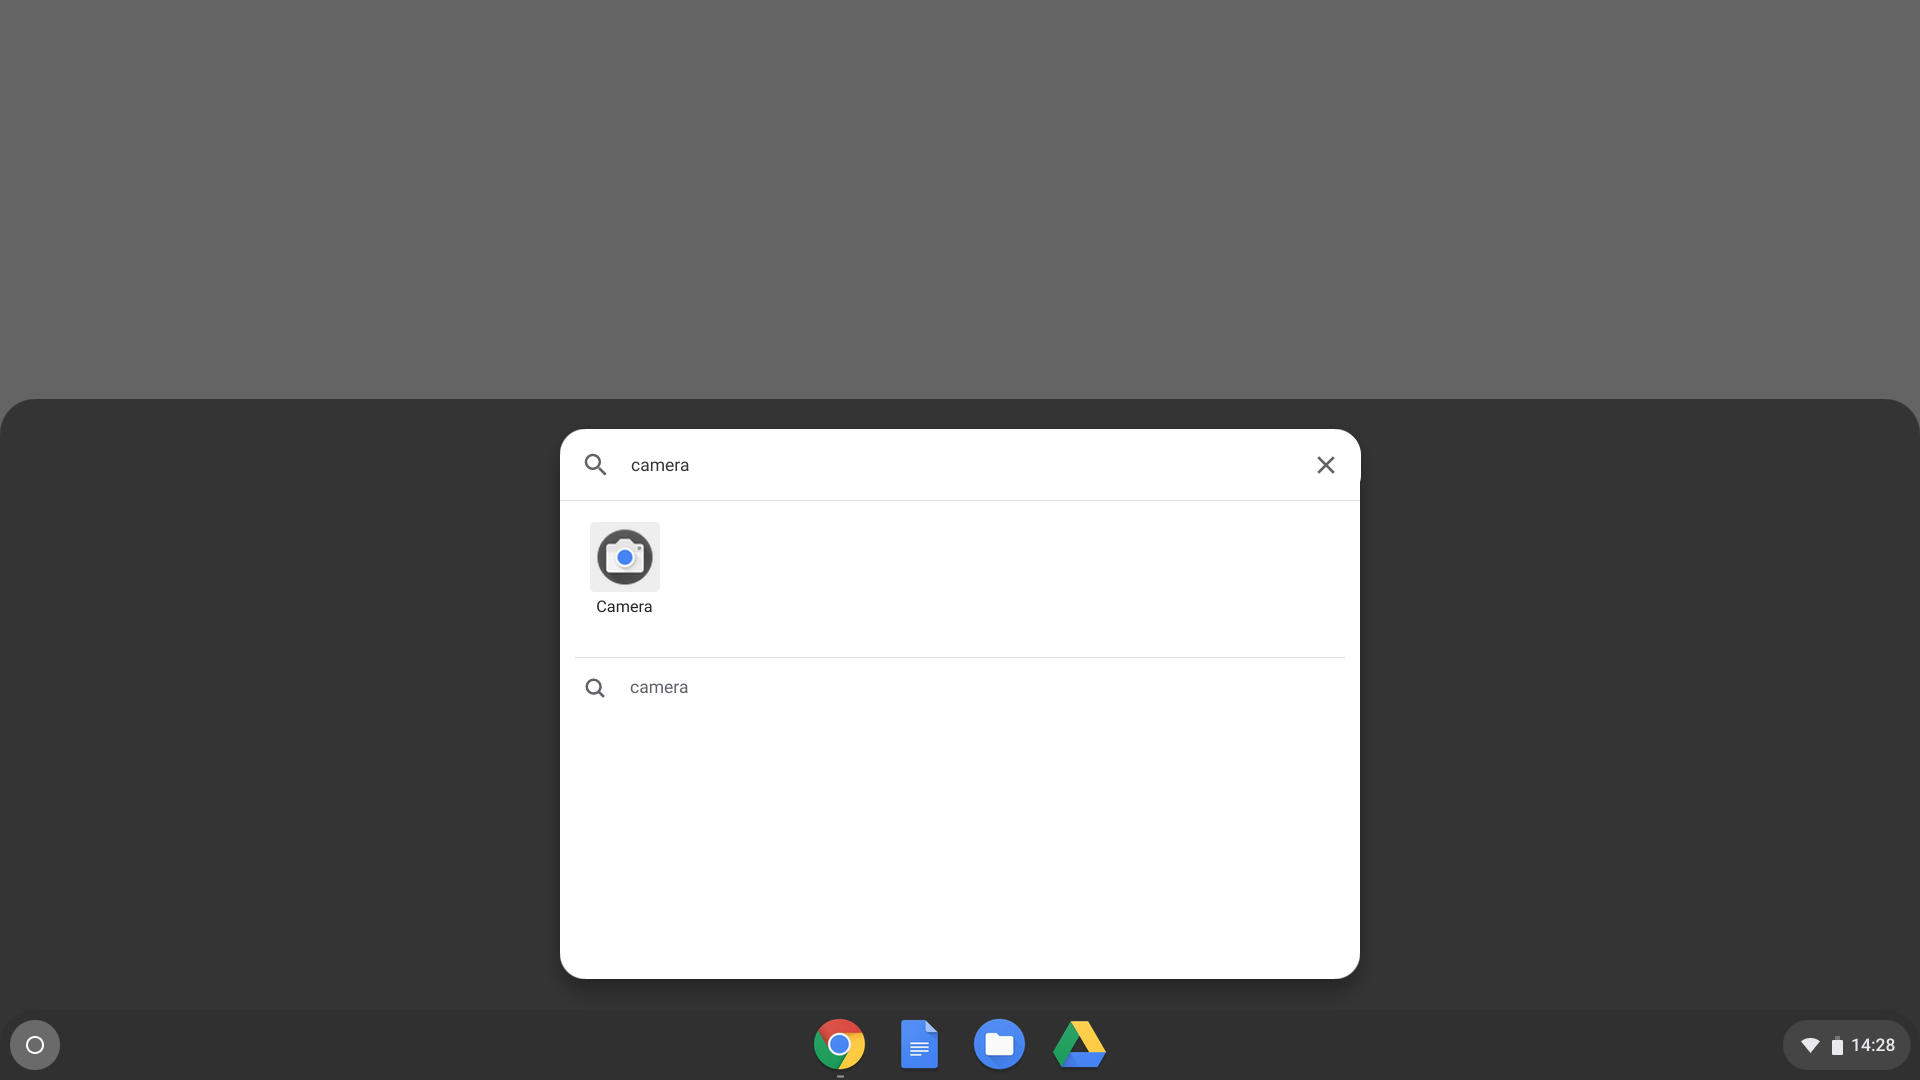 Screenshot of a Pixelbook Go with the Camera app displayed as a search result.